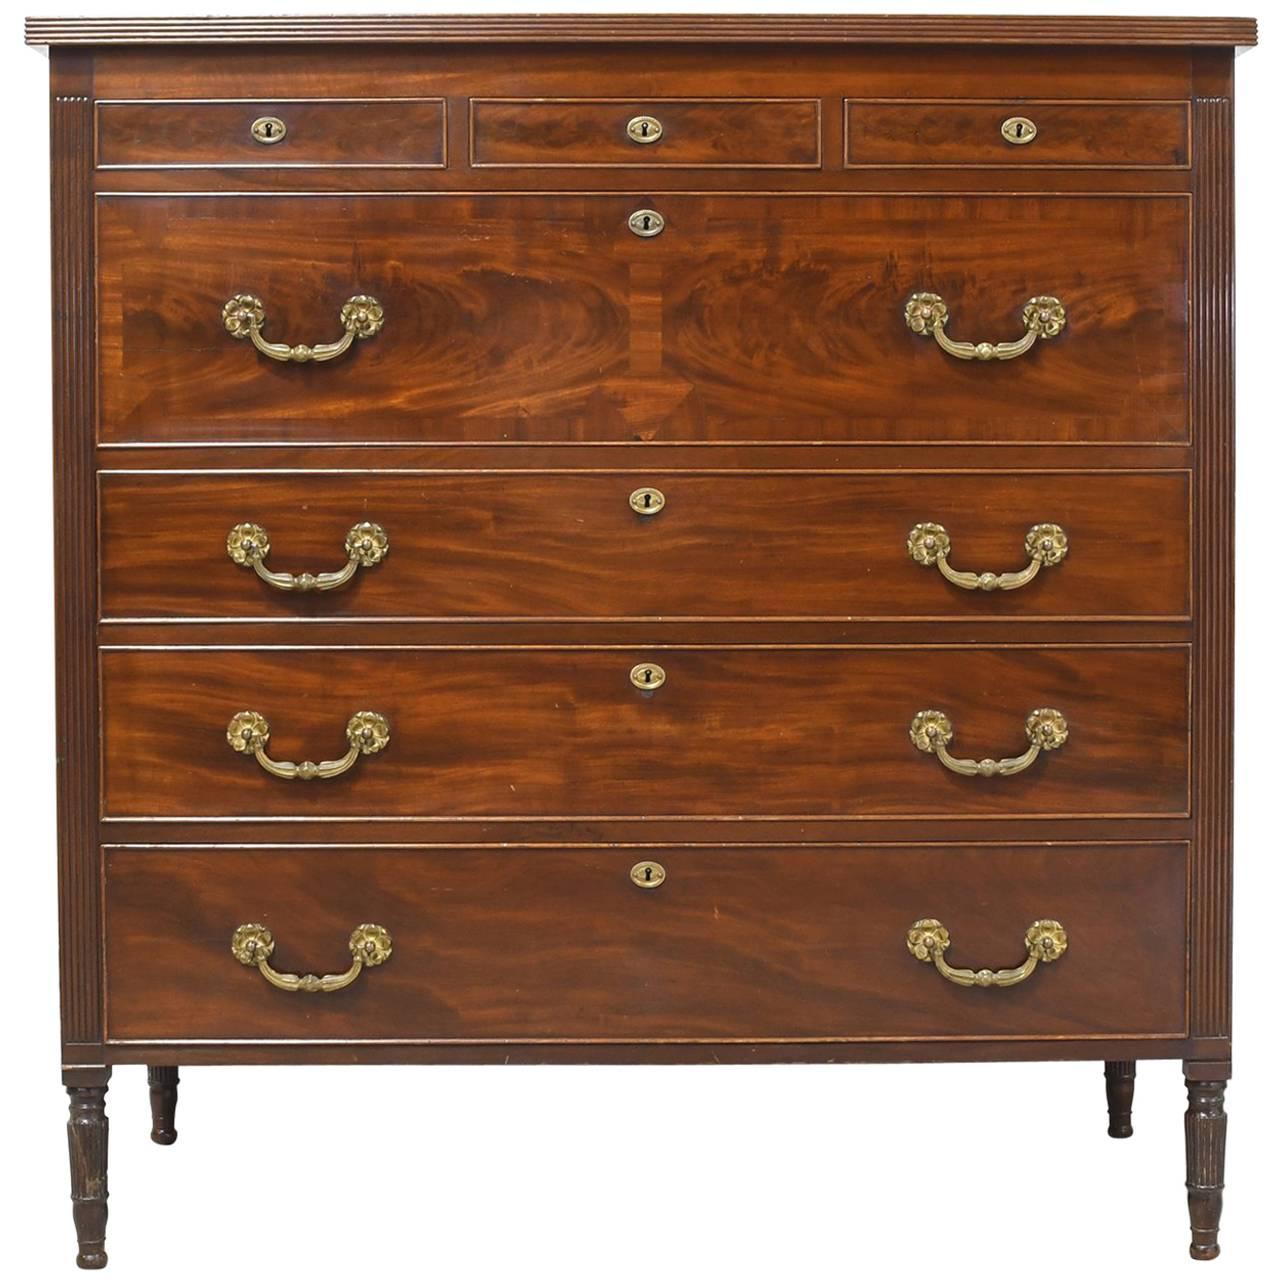 New York Chest of Drawers in Mahogany, circa 1900, Signed Ernest F. Hagen